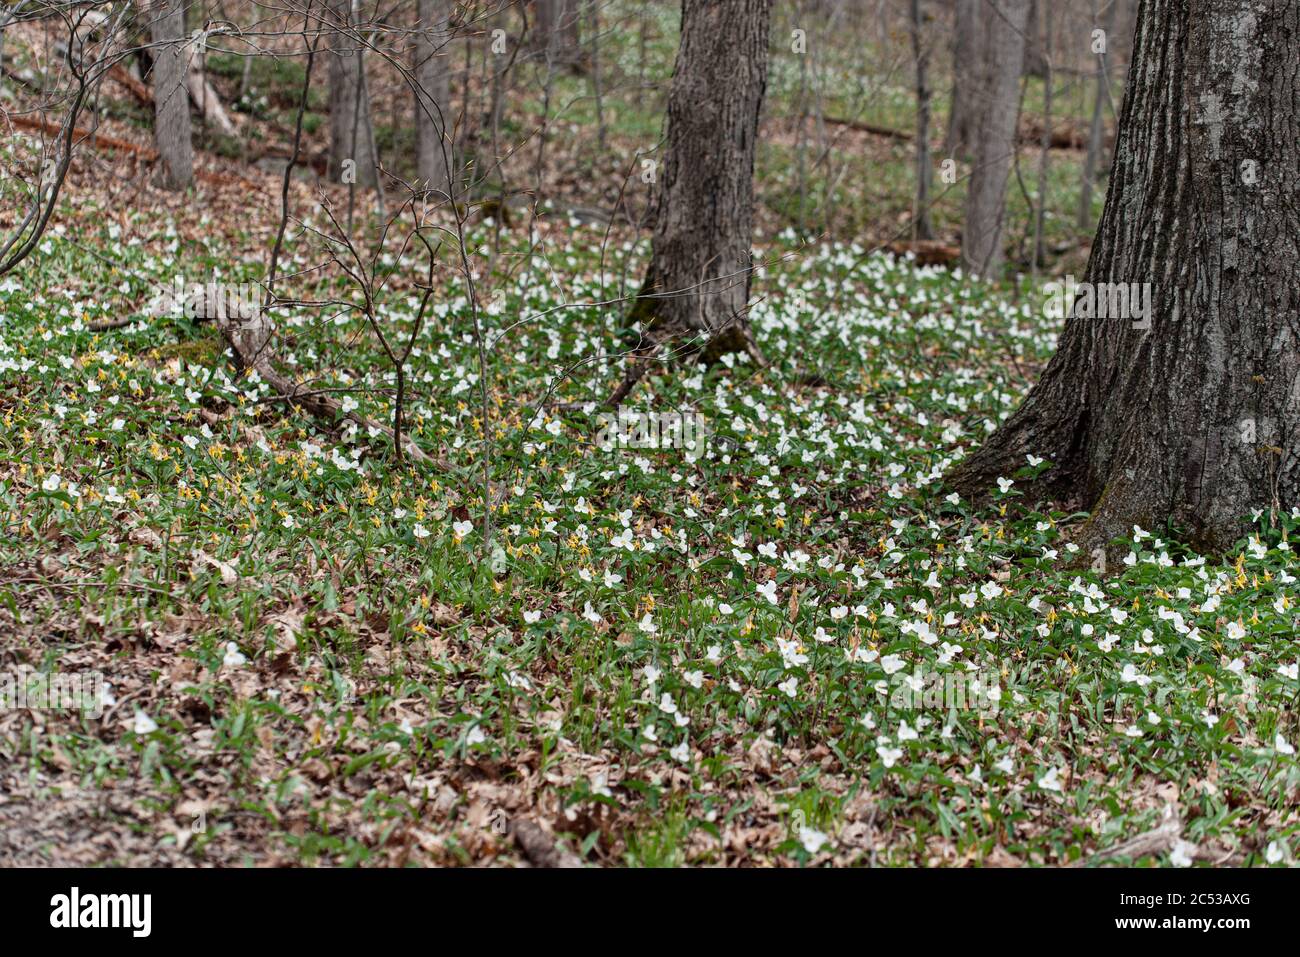 Carpet of trillium flowers blooming in the forest in Ontario, Canada. Stock Photo